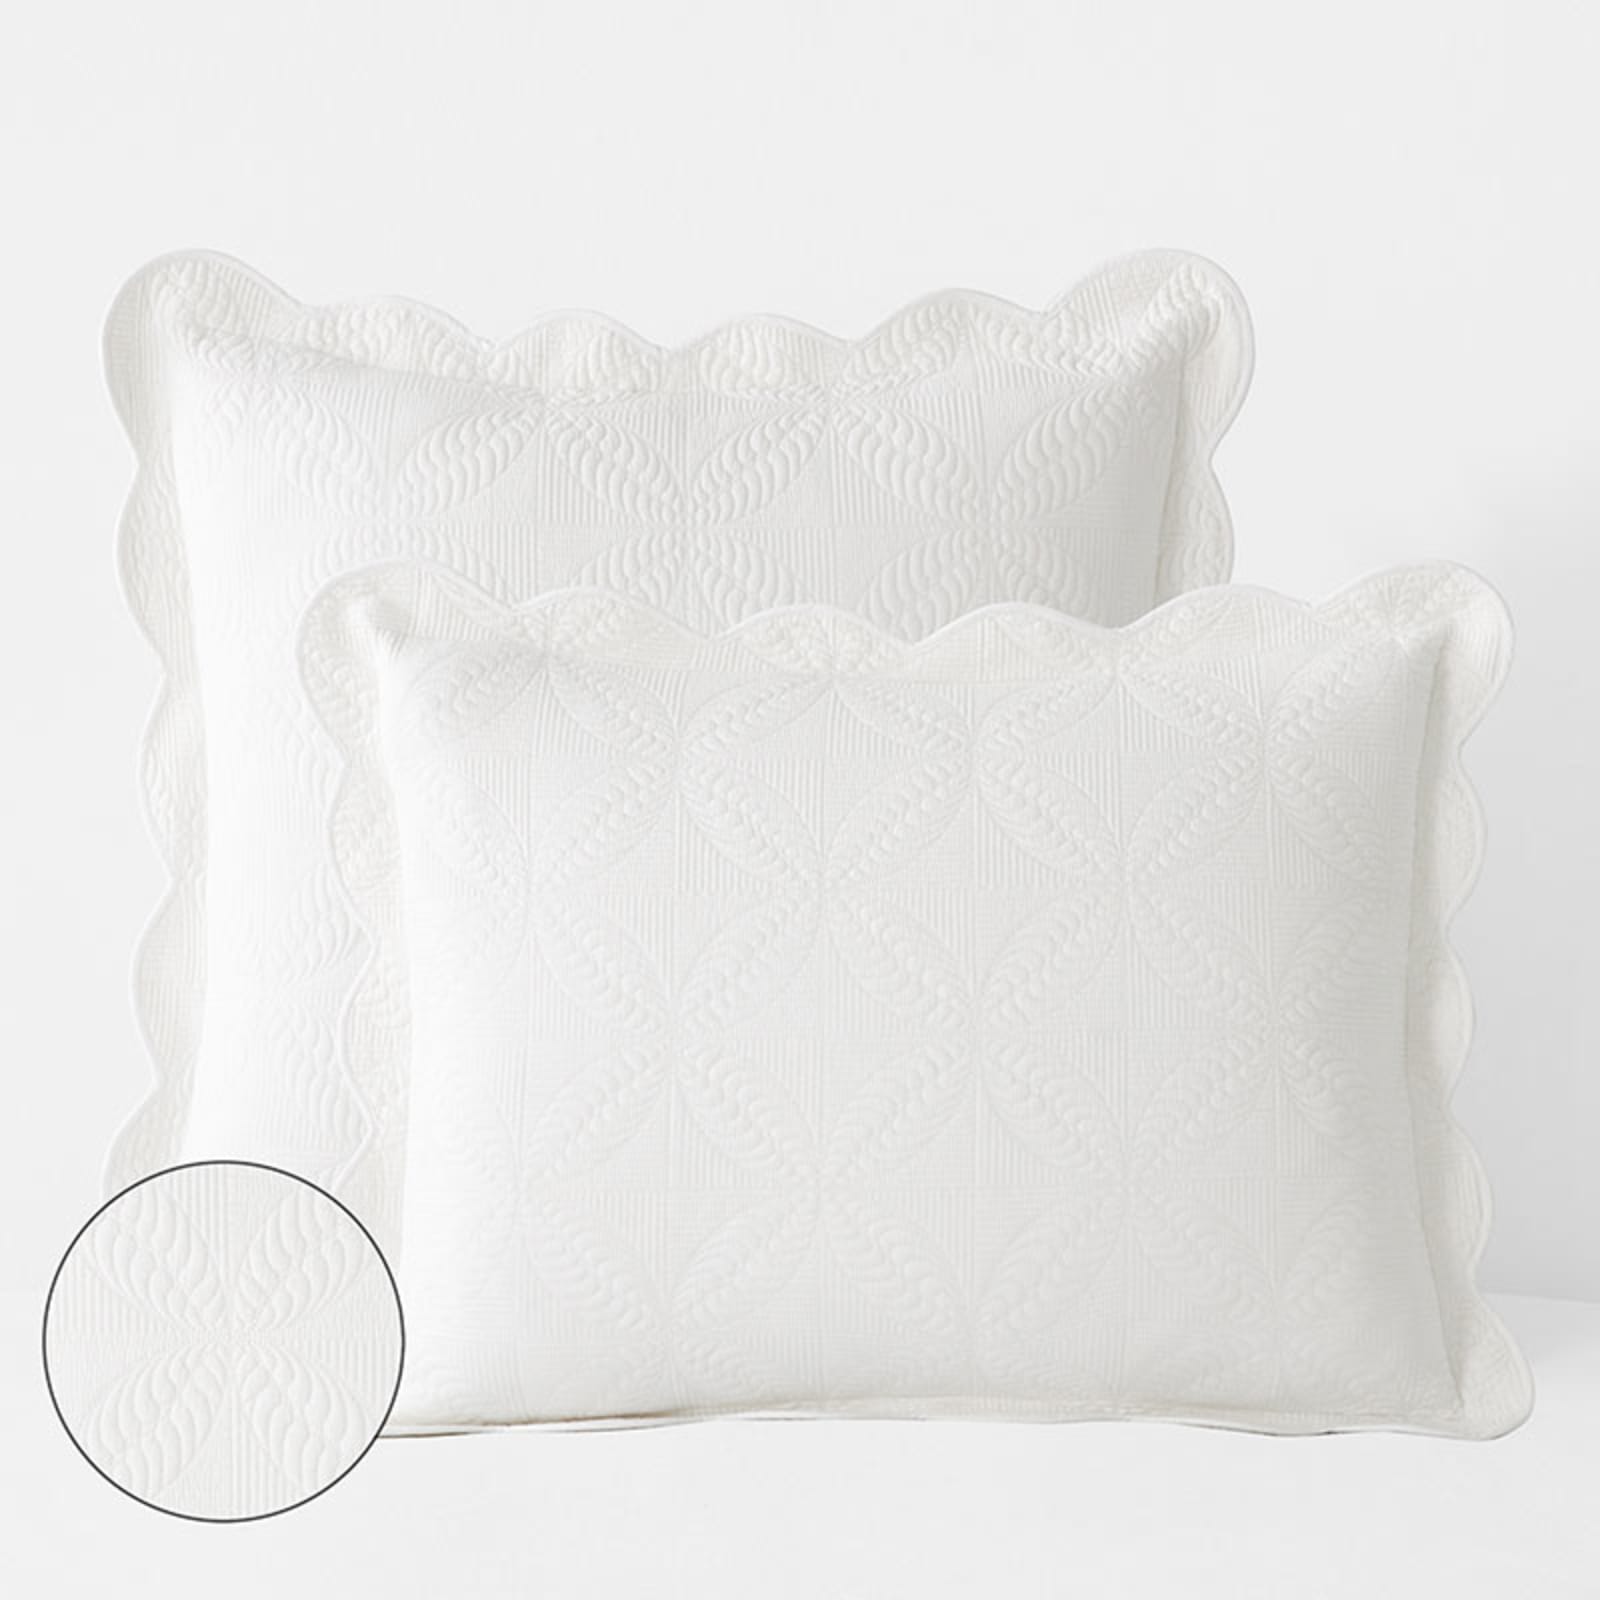 Scallop Lightweight Quilted Sham - White, Standard | The Company Store